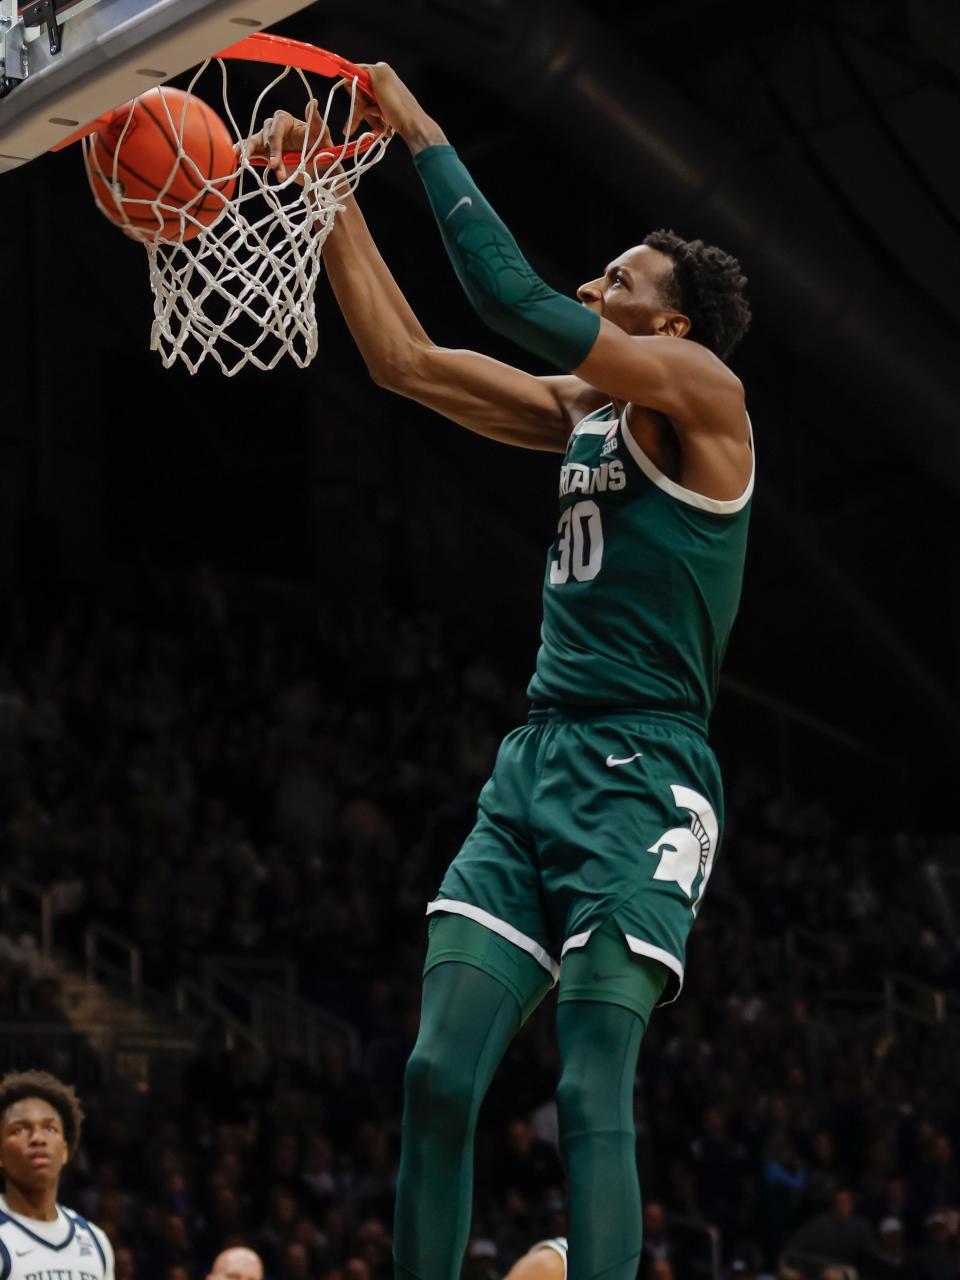 Michigan State center Marcus Bingham Jr. dunks the ball during the first half in Indianapolis, Wednesday, Nov. 17, 2021.